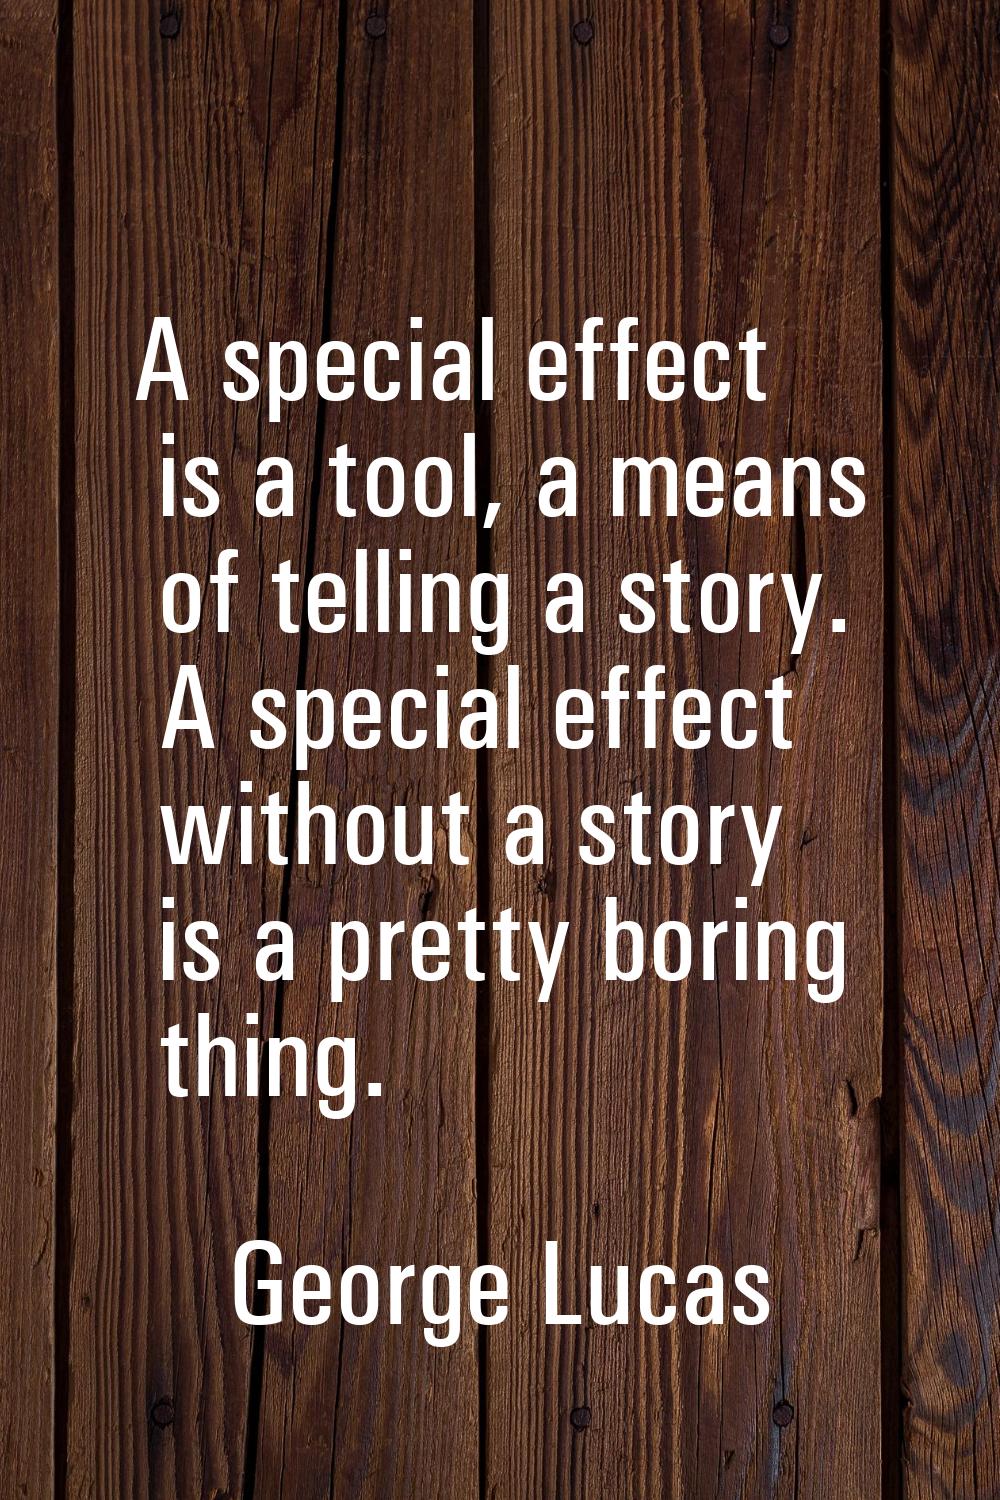 A special effect is a tool, a means of telling a story. A special effect without a story is a prett